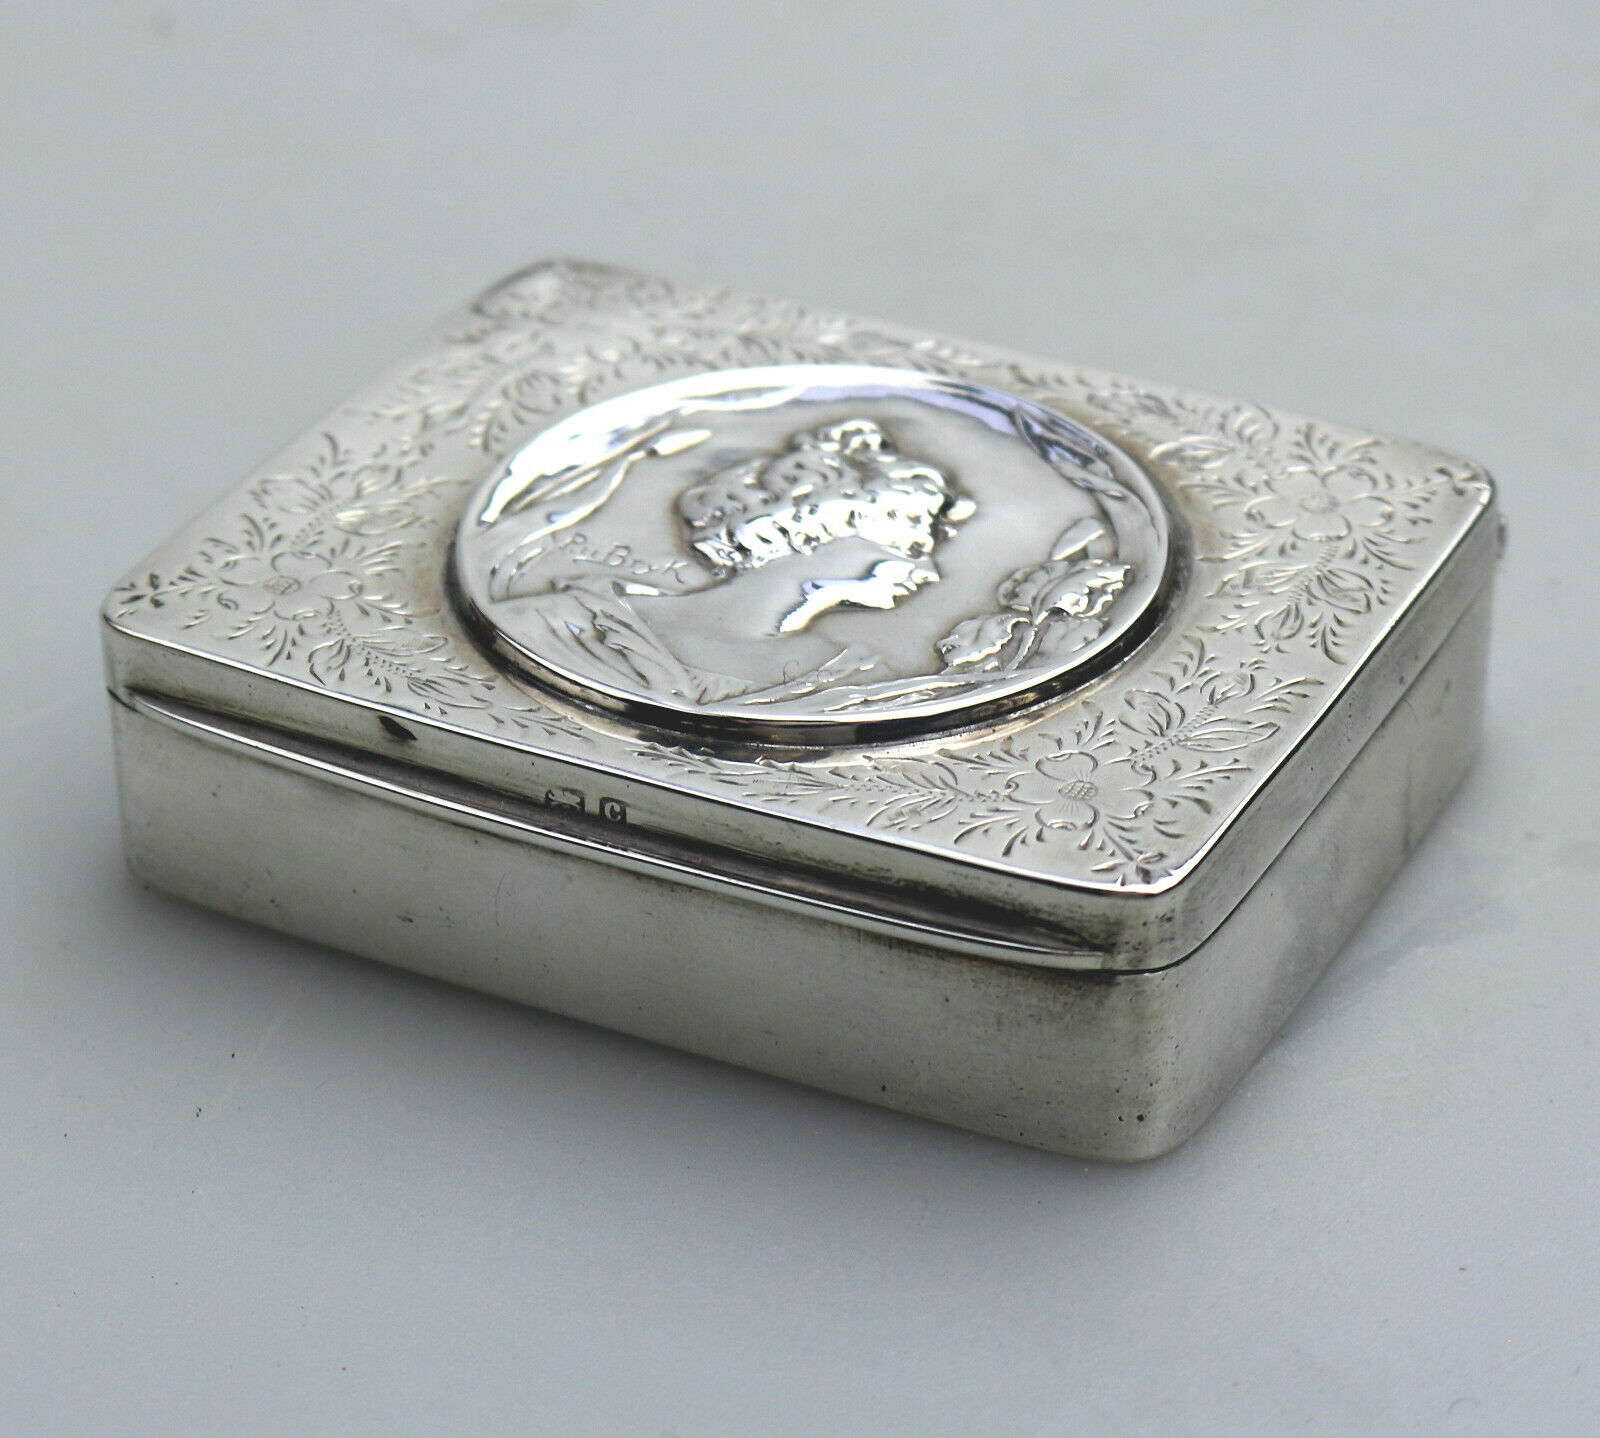 A fabulous Art Nouveau solid silver Snuff Box with Maiden C.1902 - Image 3 of 8